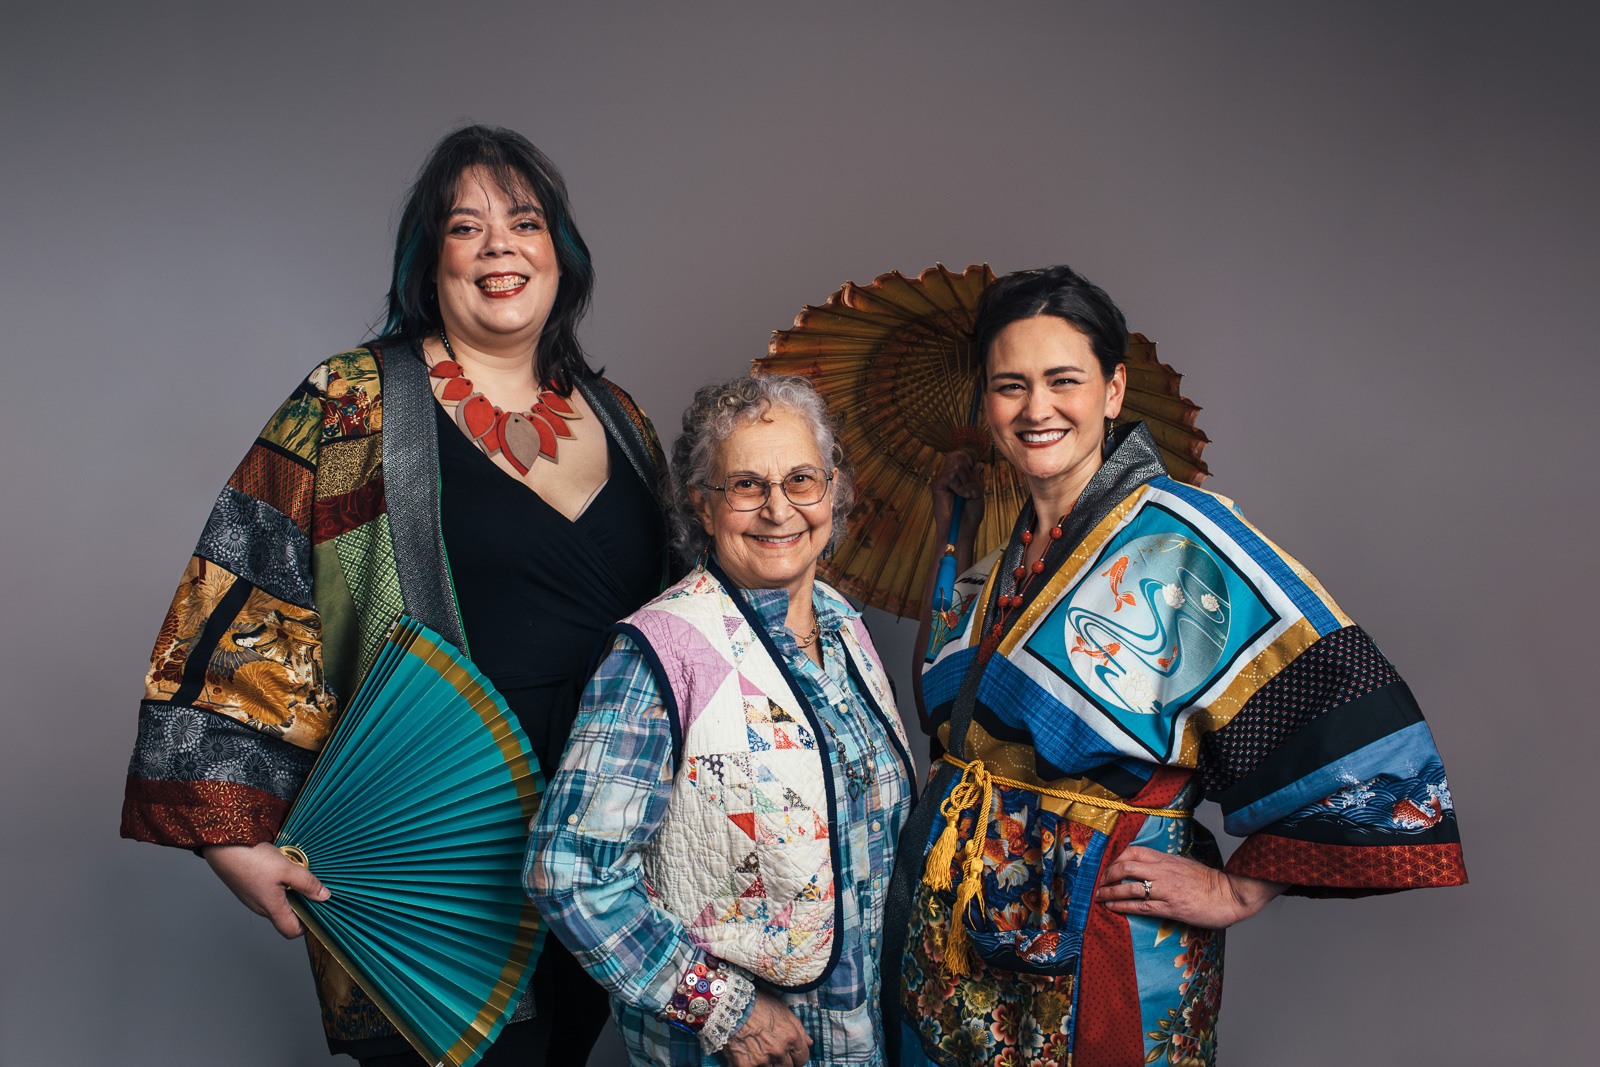 2023 Upcycled Fashion Show portrait by portrait artist, Kerry Struble, of Birch Blaze Studios located in Wakefield, NH. Modern kimonos designed and created with repurposed materials,